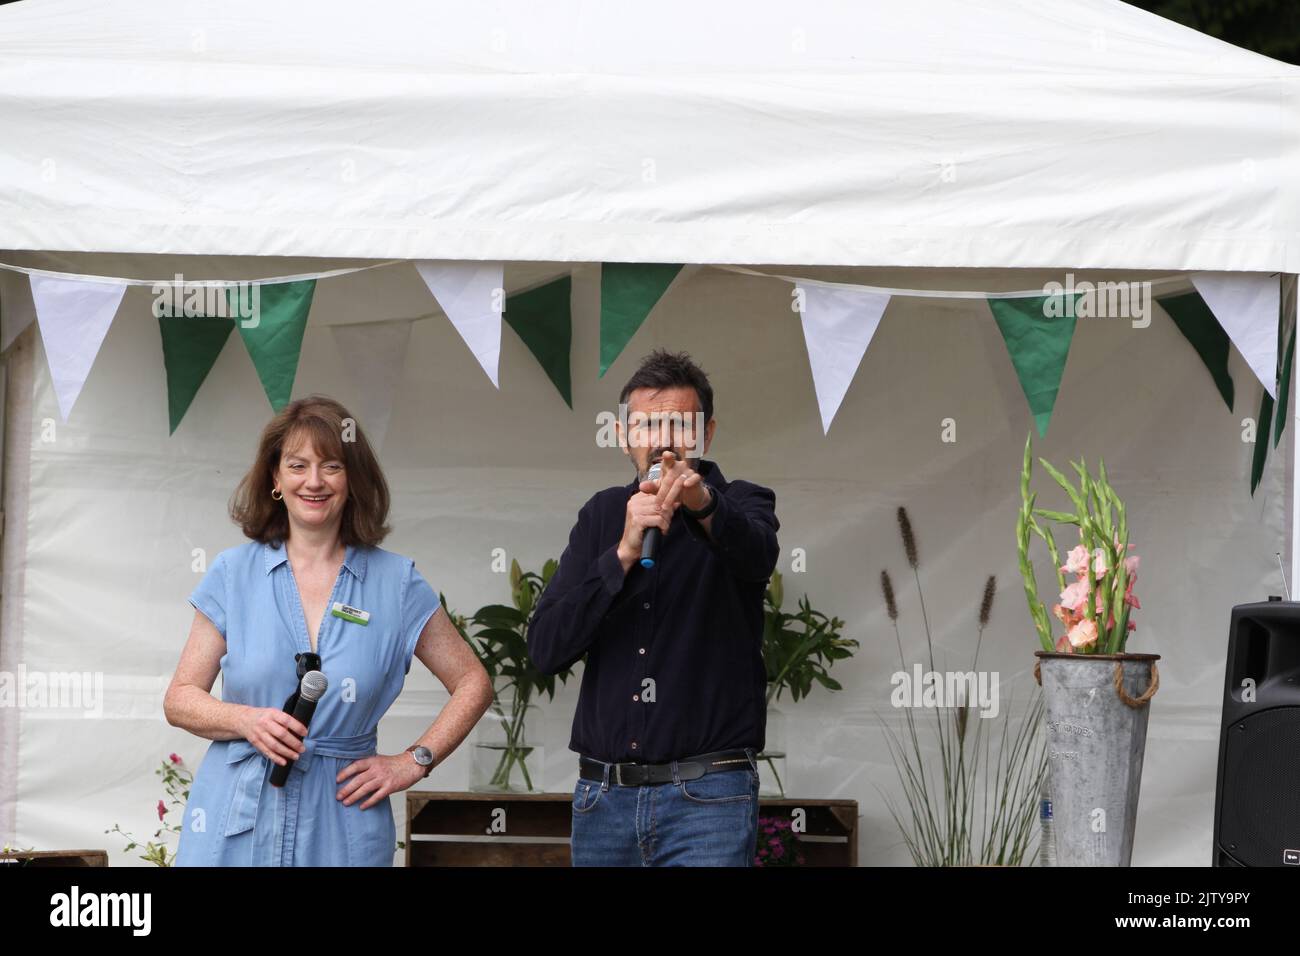 The first ever BBC Gardeners' World Autumn Fair is taking place at Audley End House in Essex. Adam Frost, one of the presenters of the BBC Gardeners' World programme, in conversation with Lucy Hall, editor of BBC Gardeners' World magazine. Stock Photo